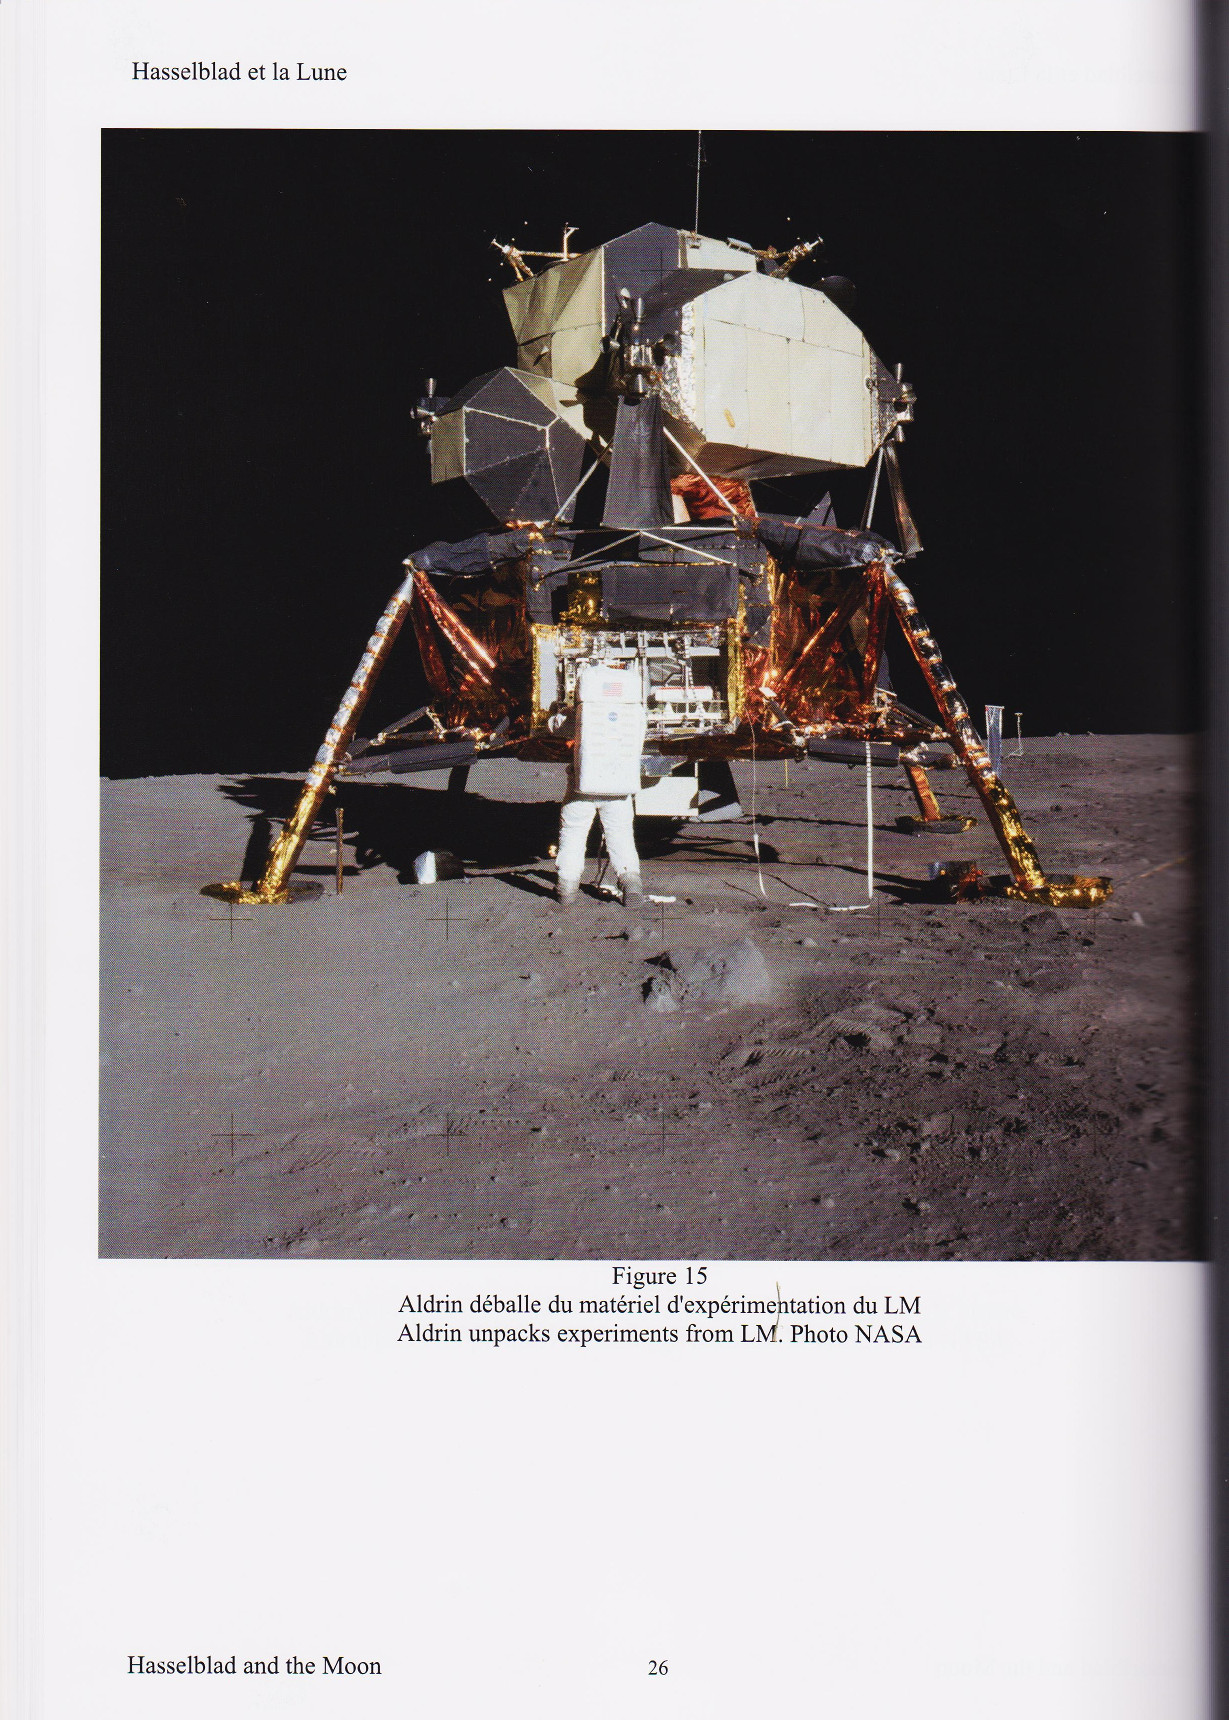 Hasselblad and the Moon - Book page 26